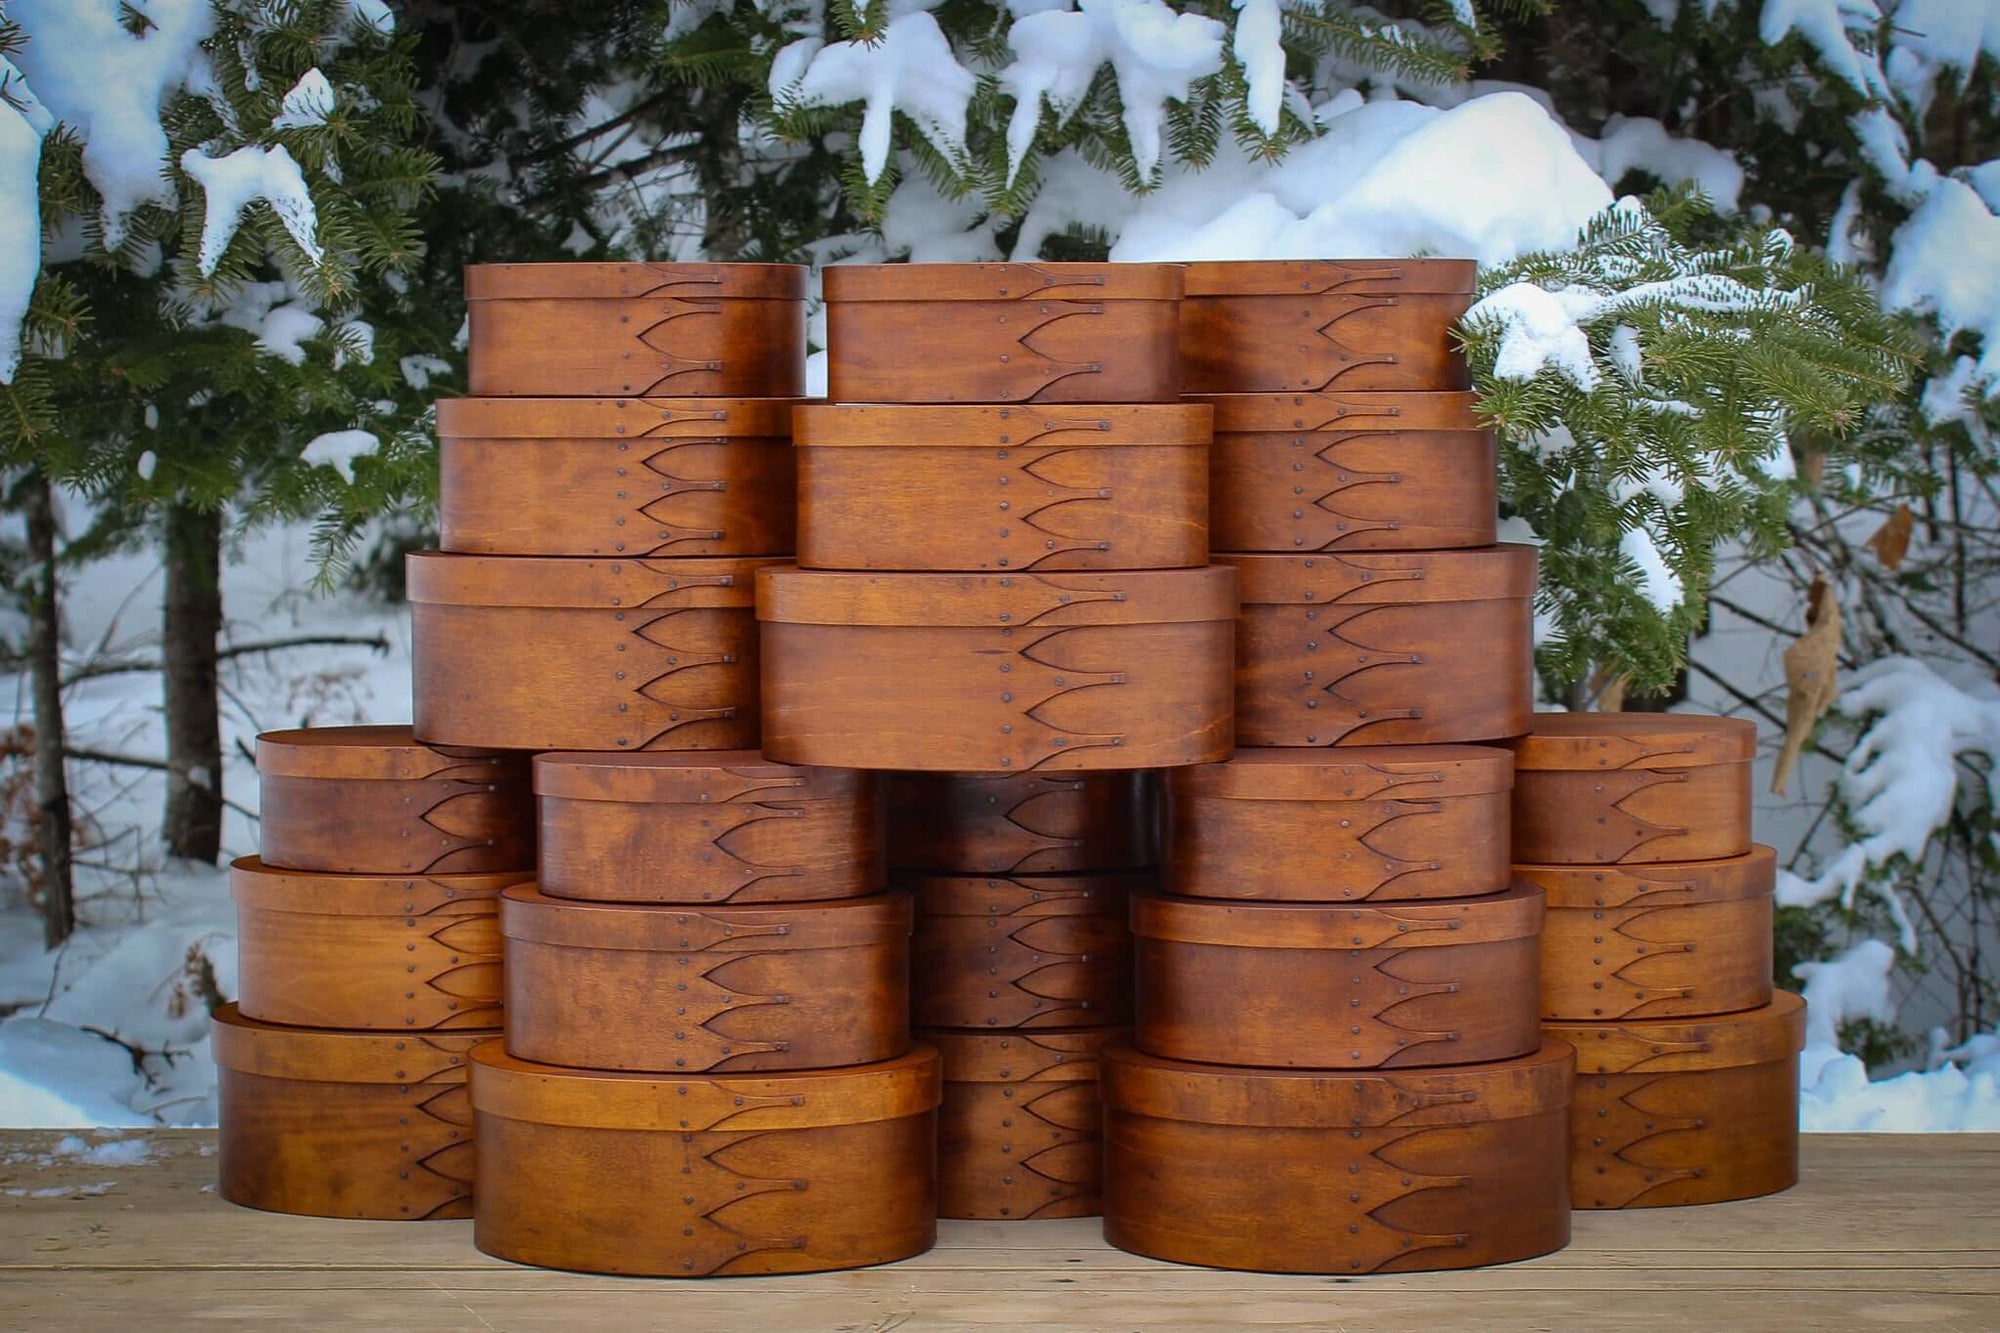 January Shop News and Happenings - LeHays Shaker Boxes